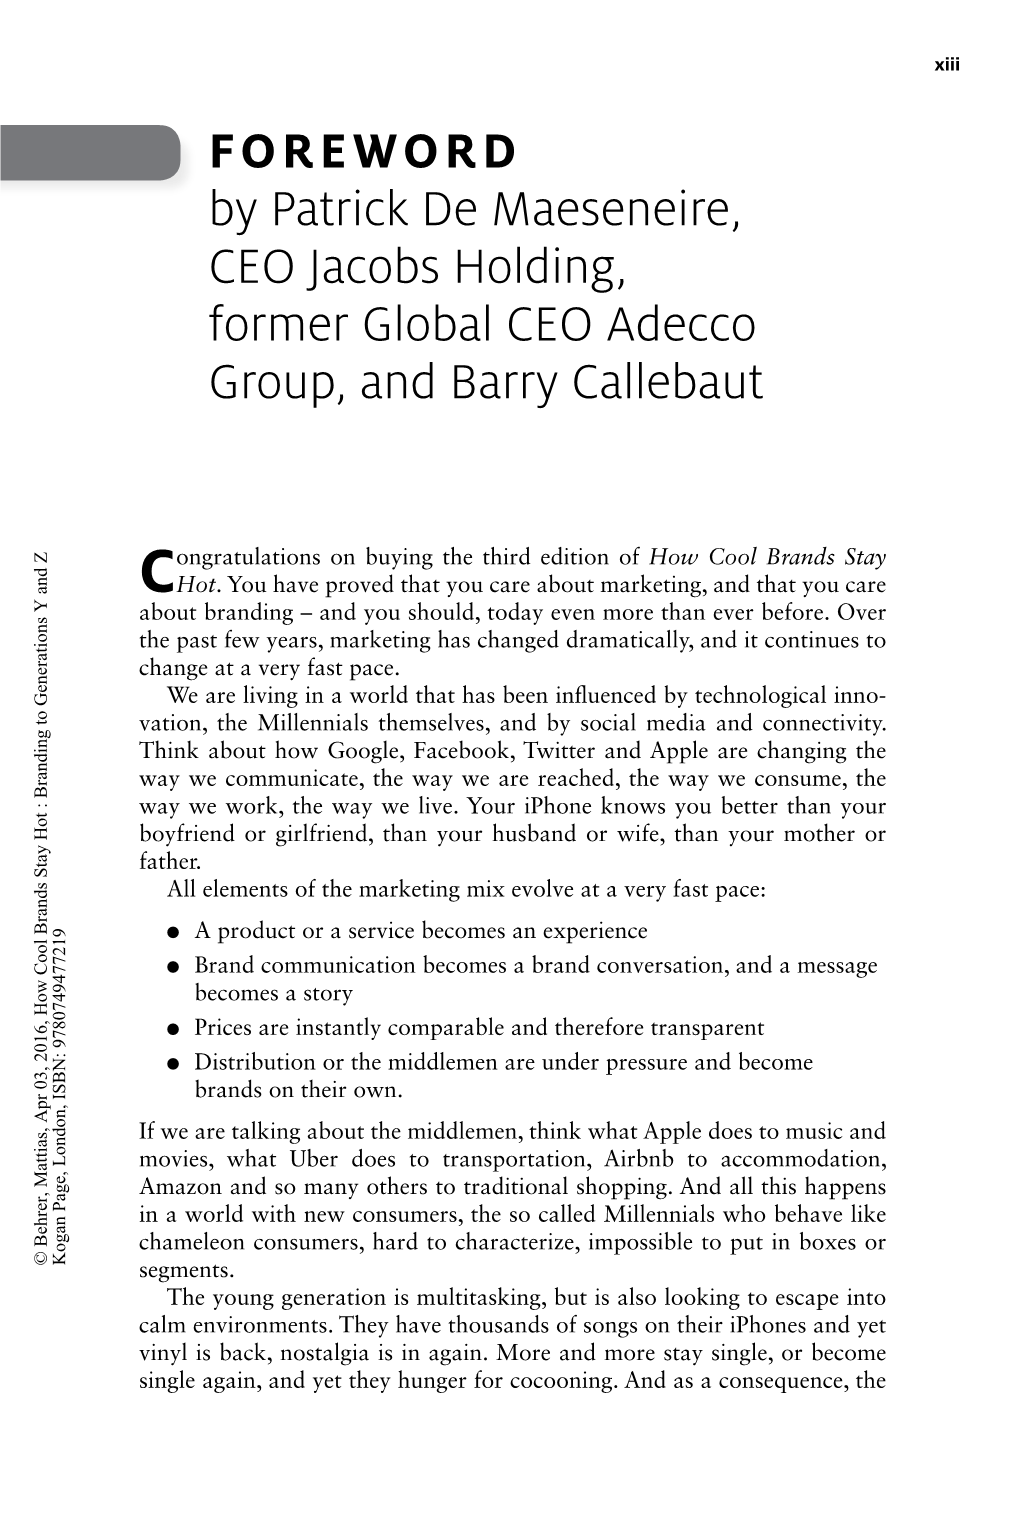 Foreword by Patrick De Maeseneire, CEO Jacobs Holding, Former Global CEO Adecco Group, and Barry Callebaut